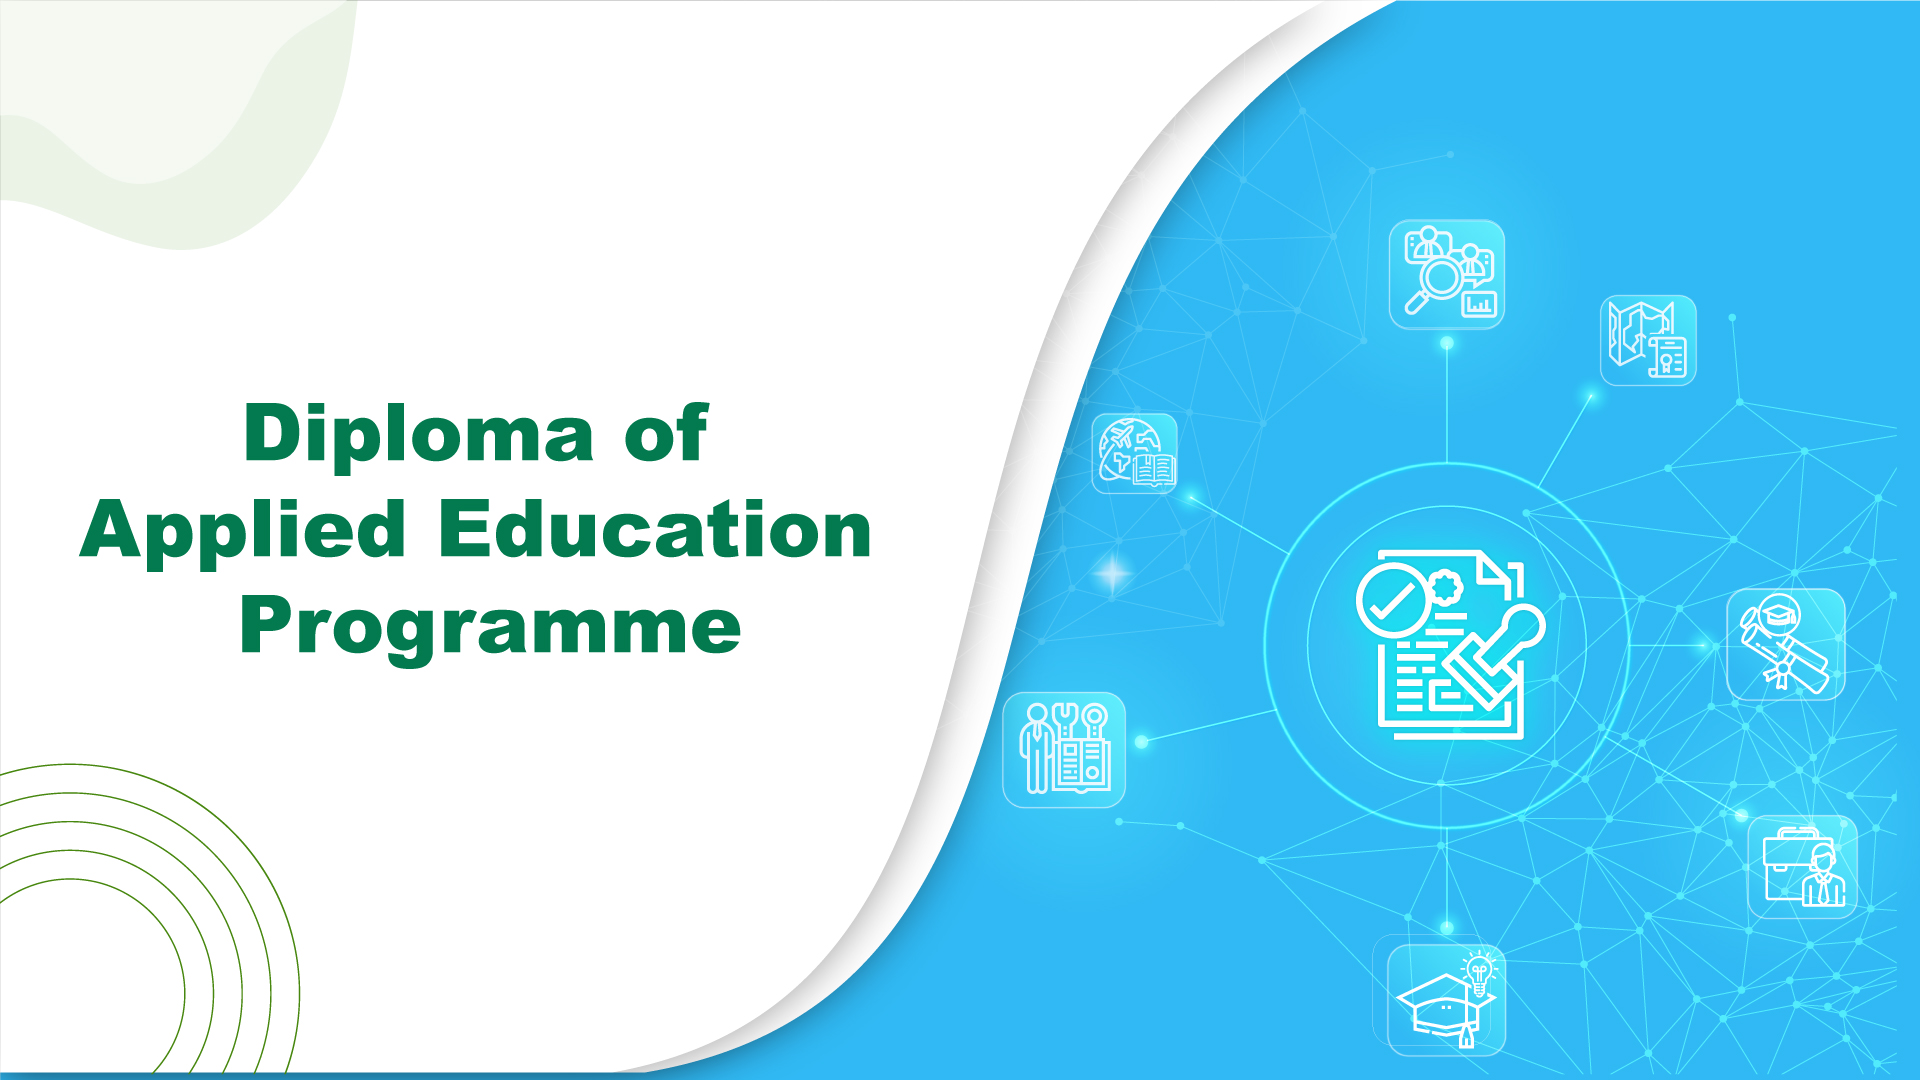 Diploma of Applied Education Programme